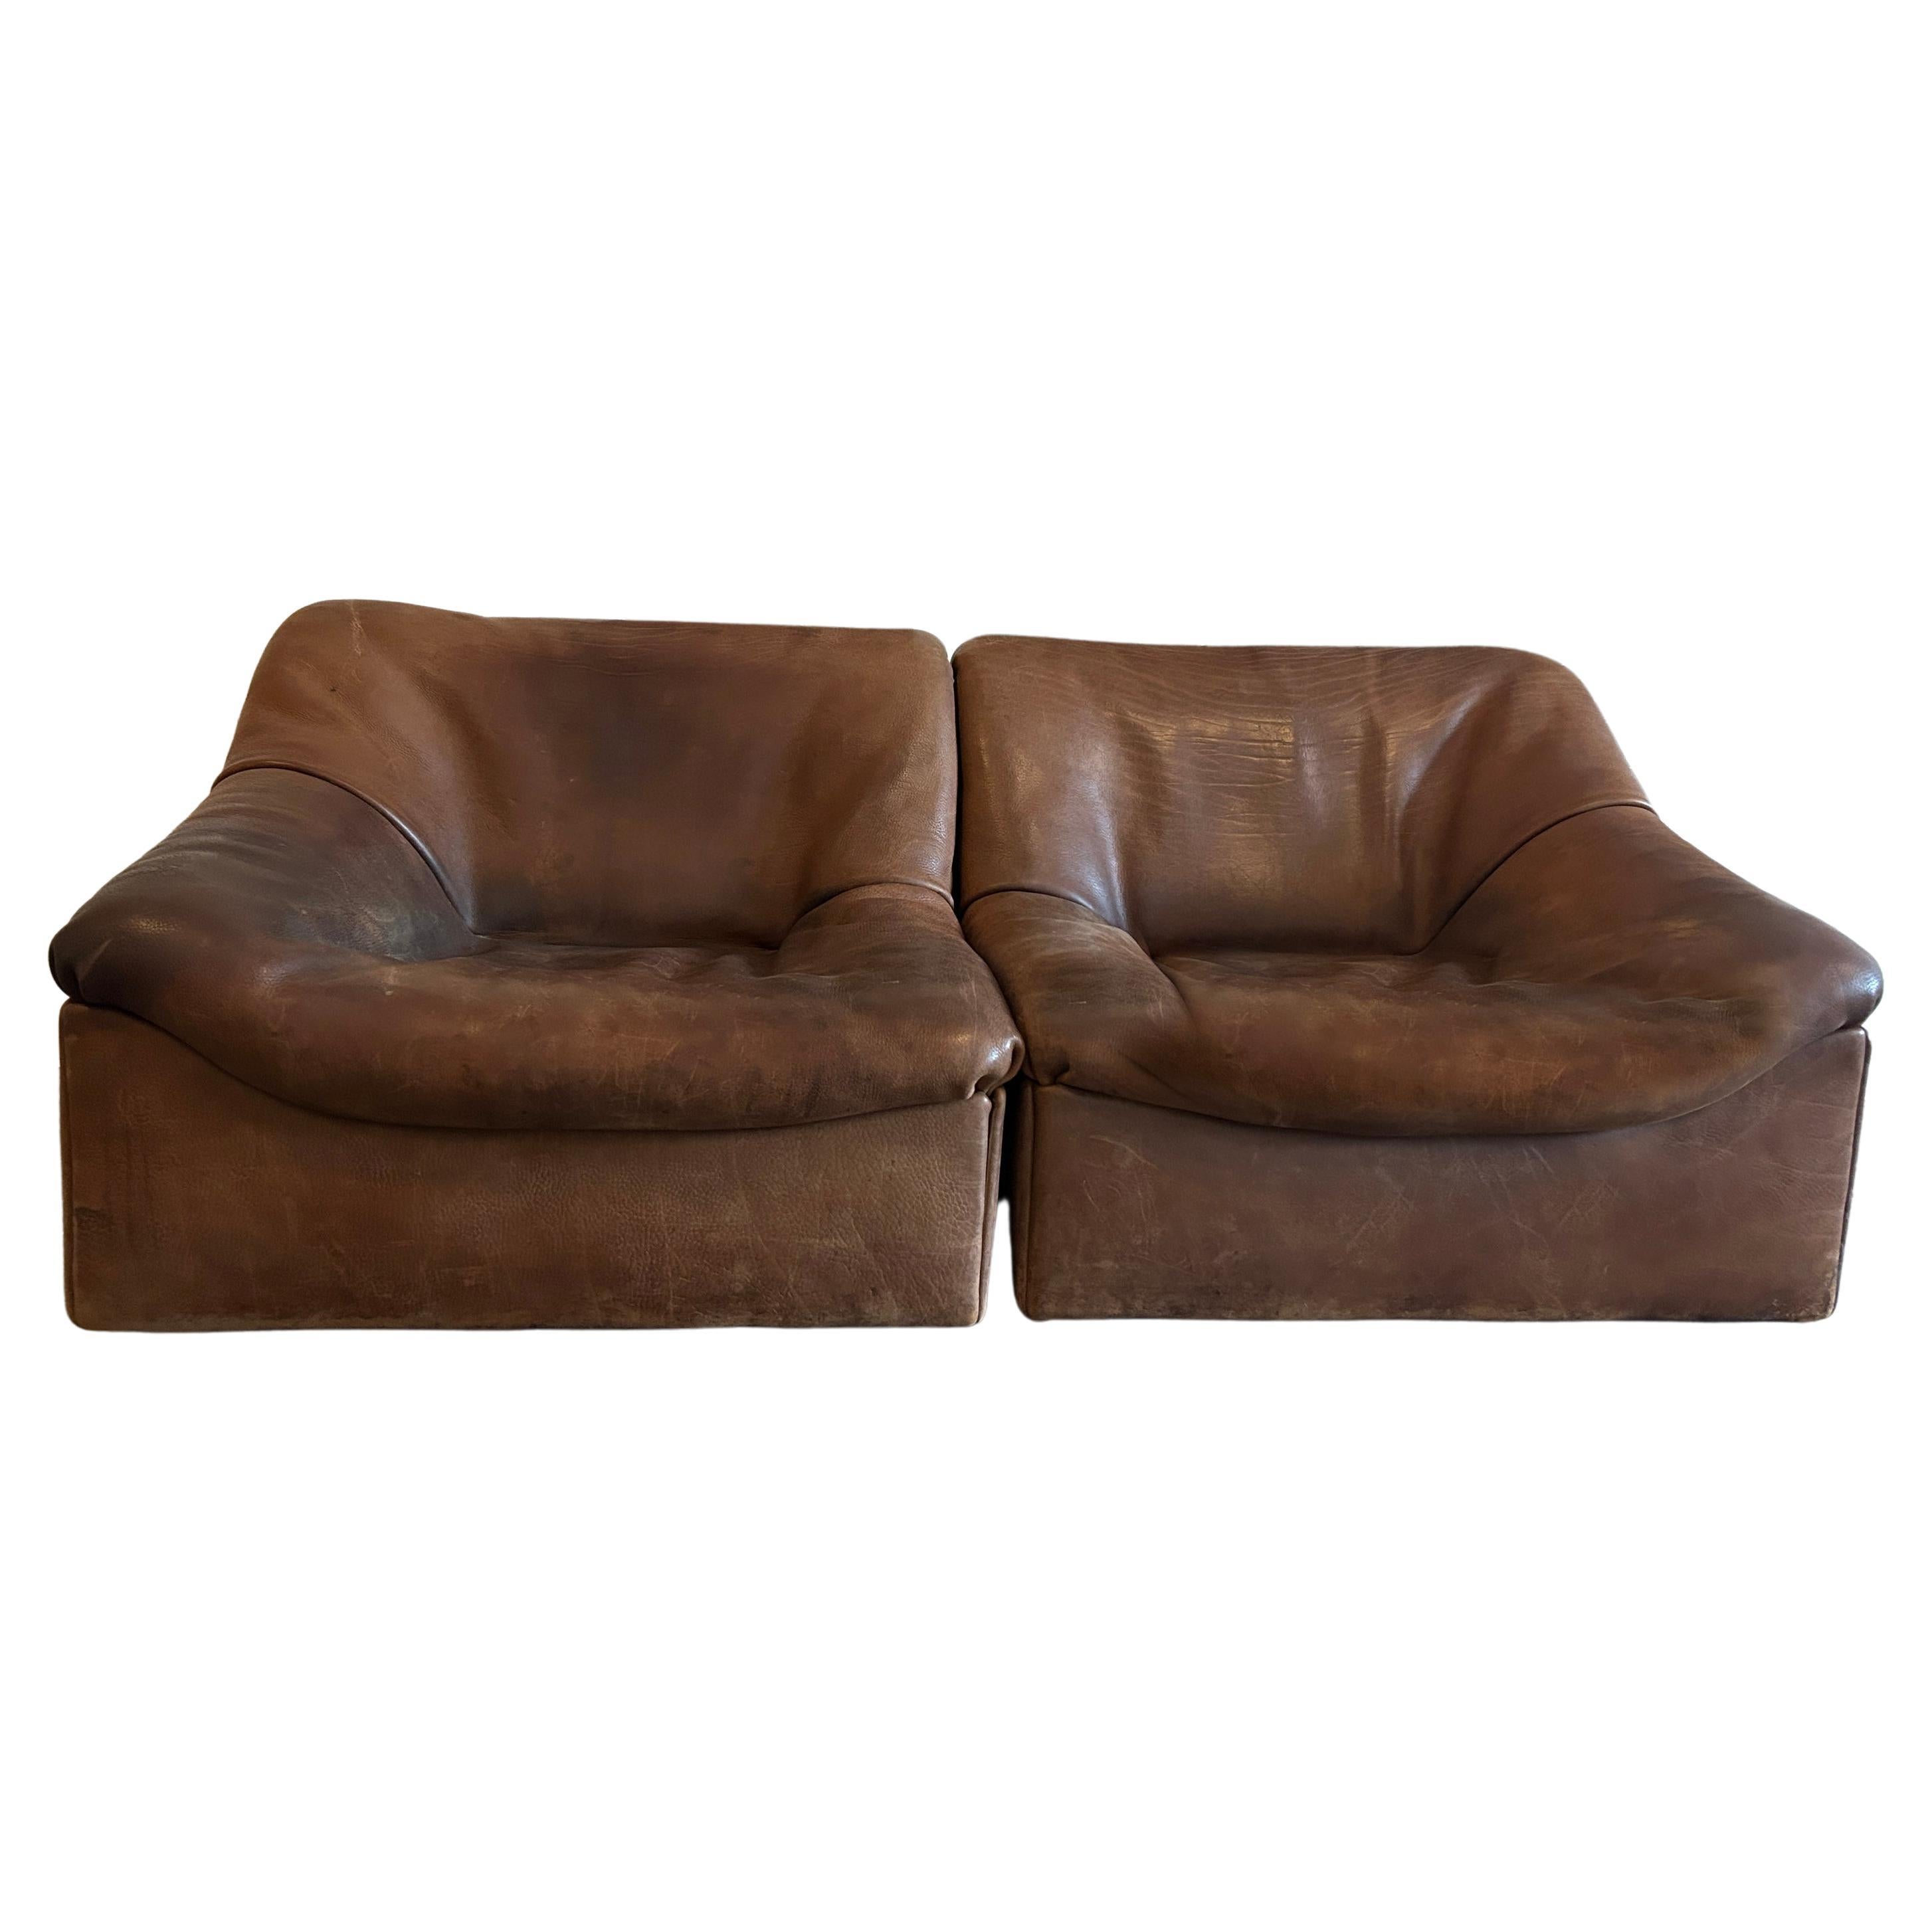 Midcentury De Sede Ds46 Loveseat Sofa Cognac Buffalo Leather Switzerland 1970s In Good Condition For Sale In BROOKLYN, NY